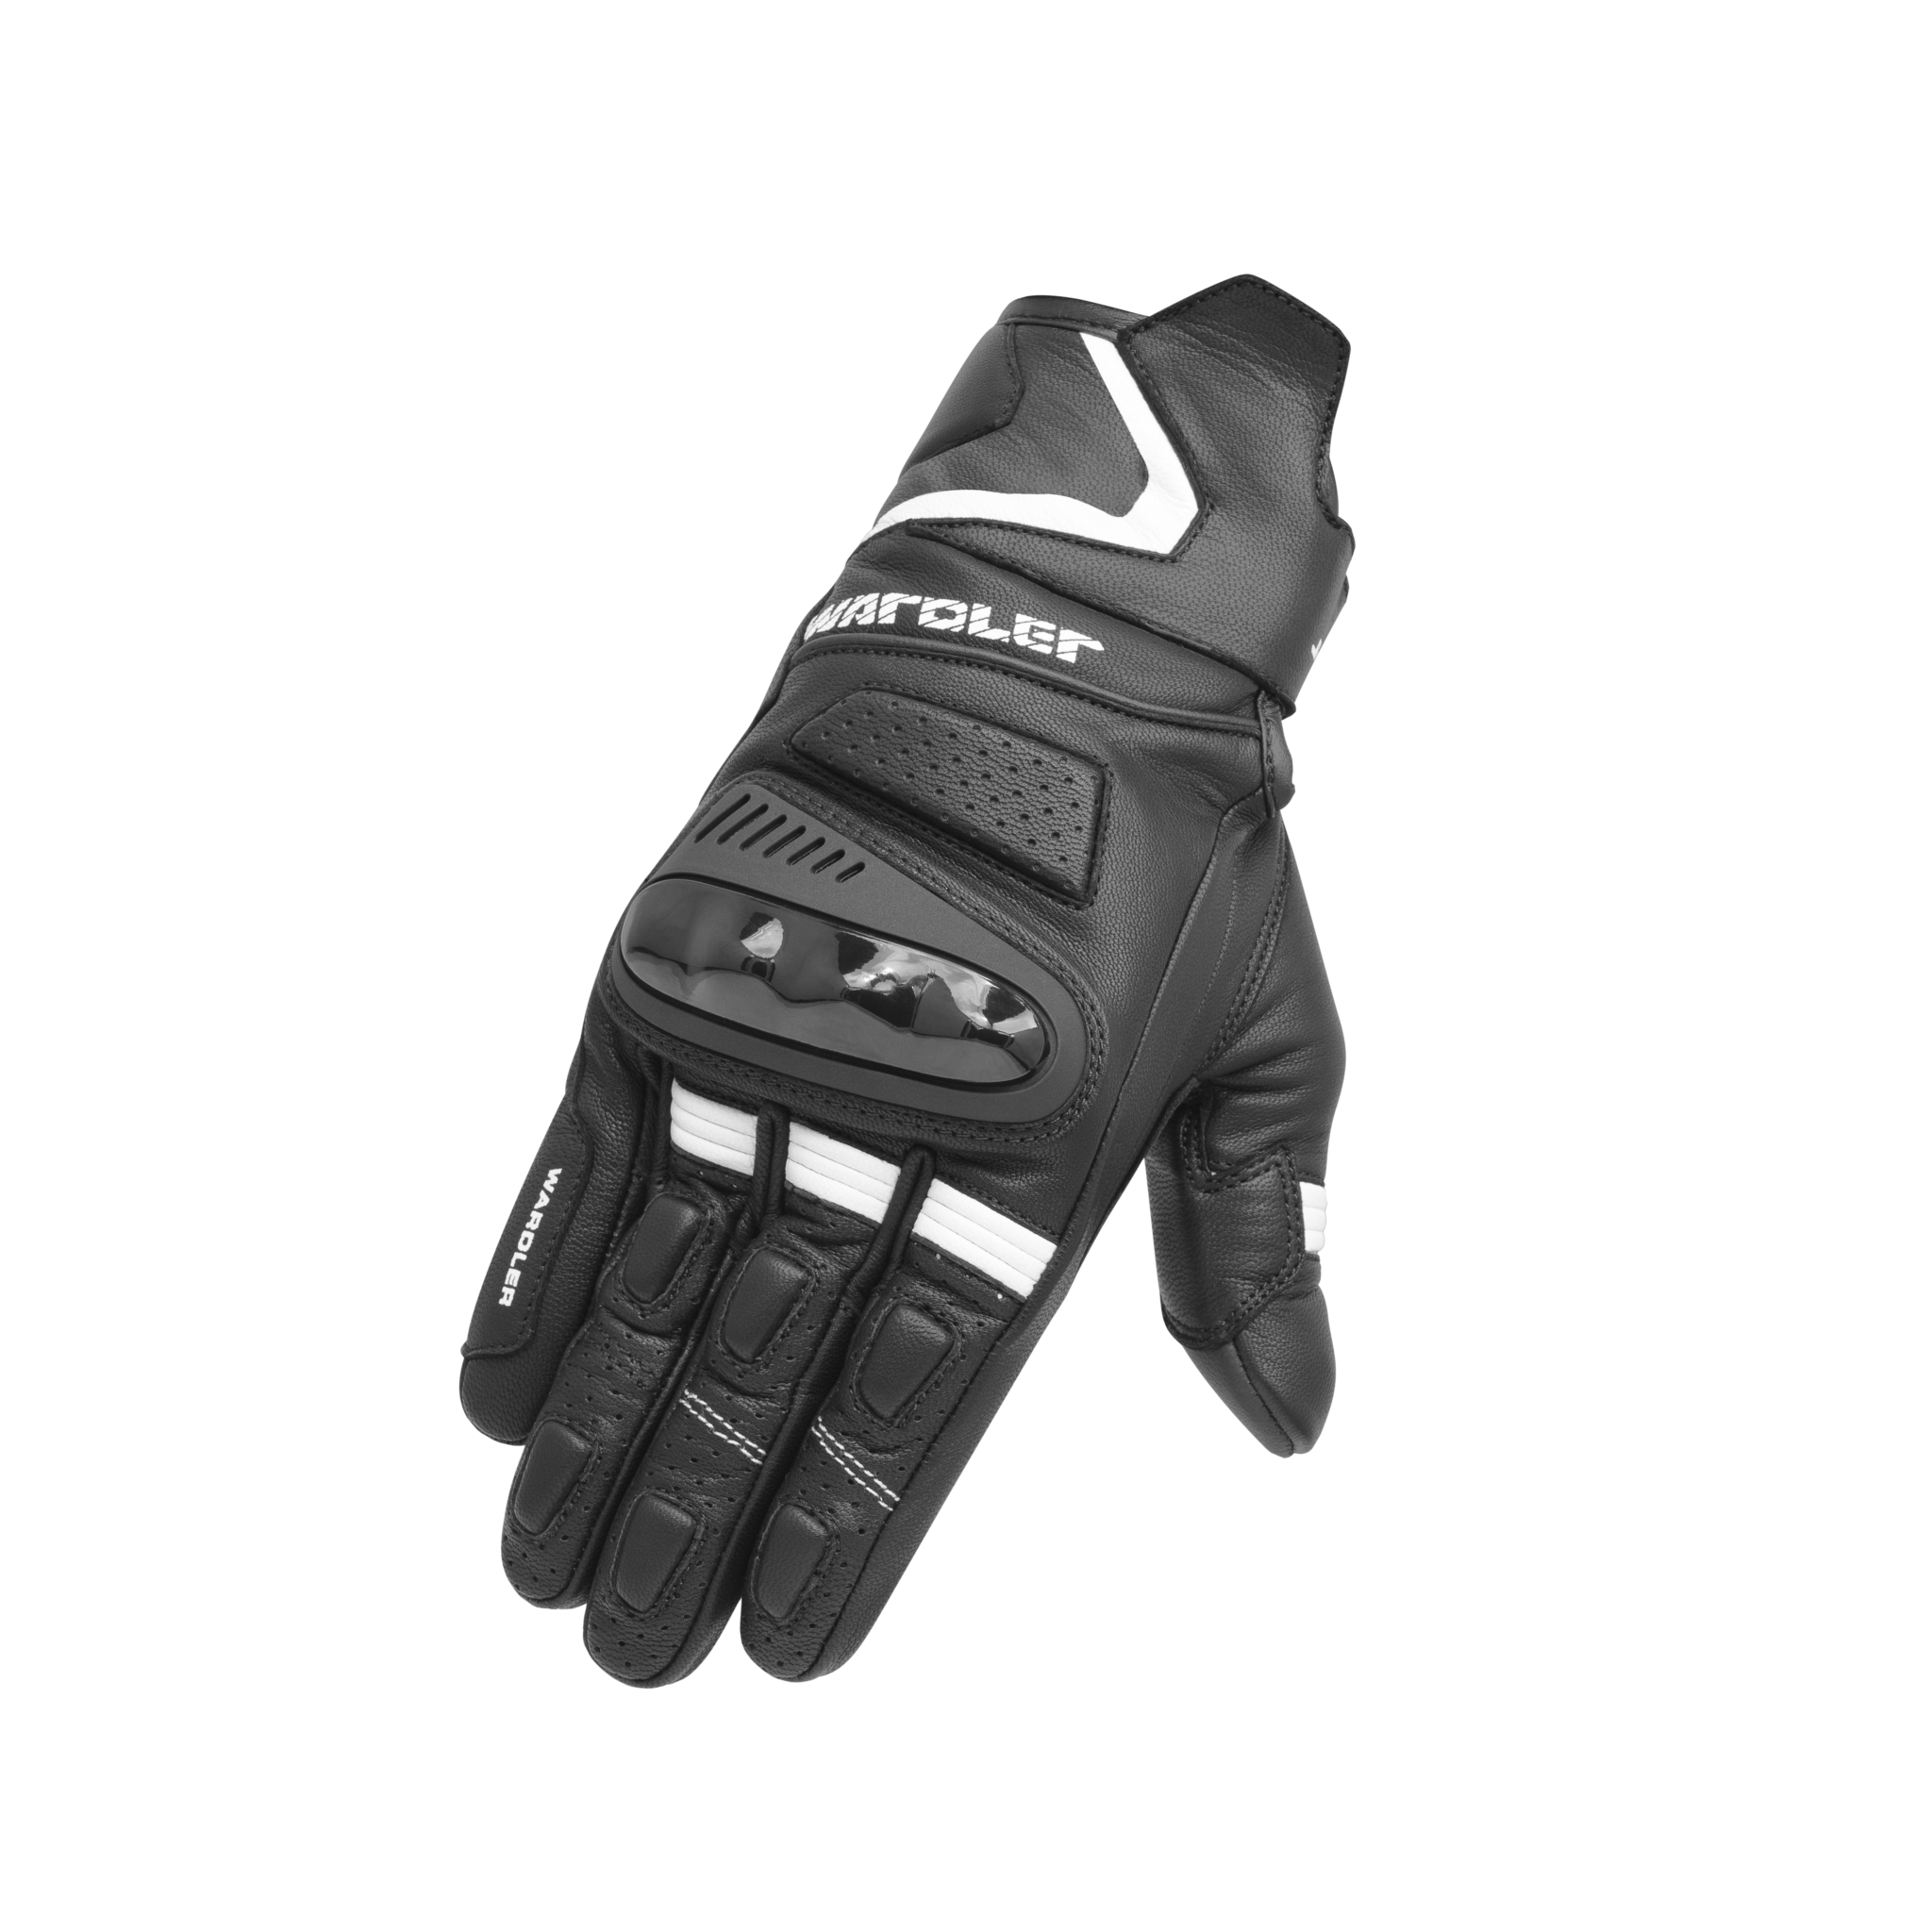 motorcycle gloves, TPU protection, Vortex Gloves breathable black-white front